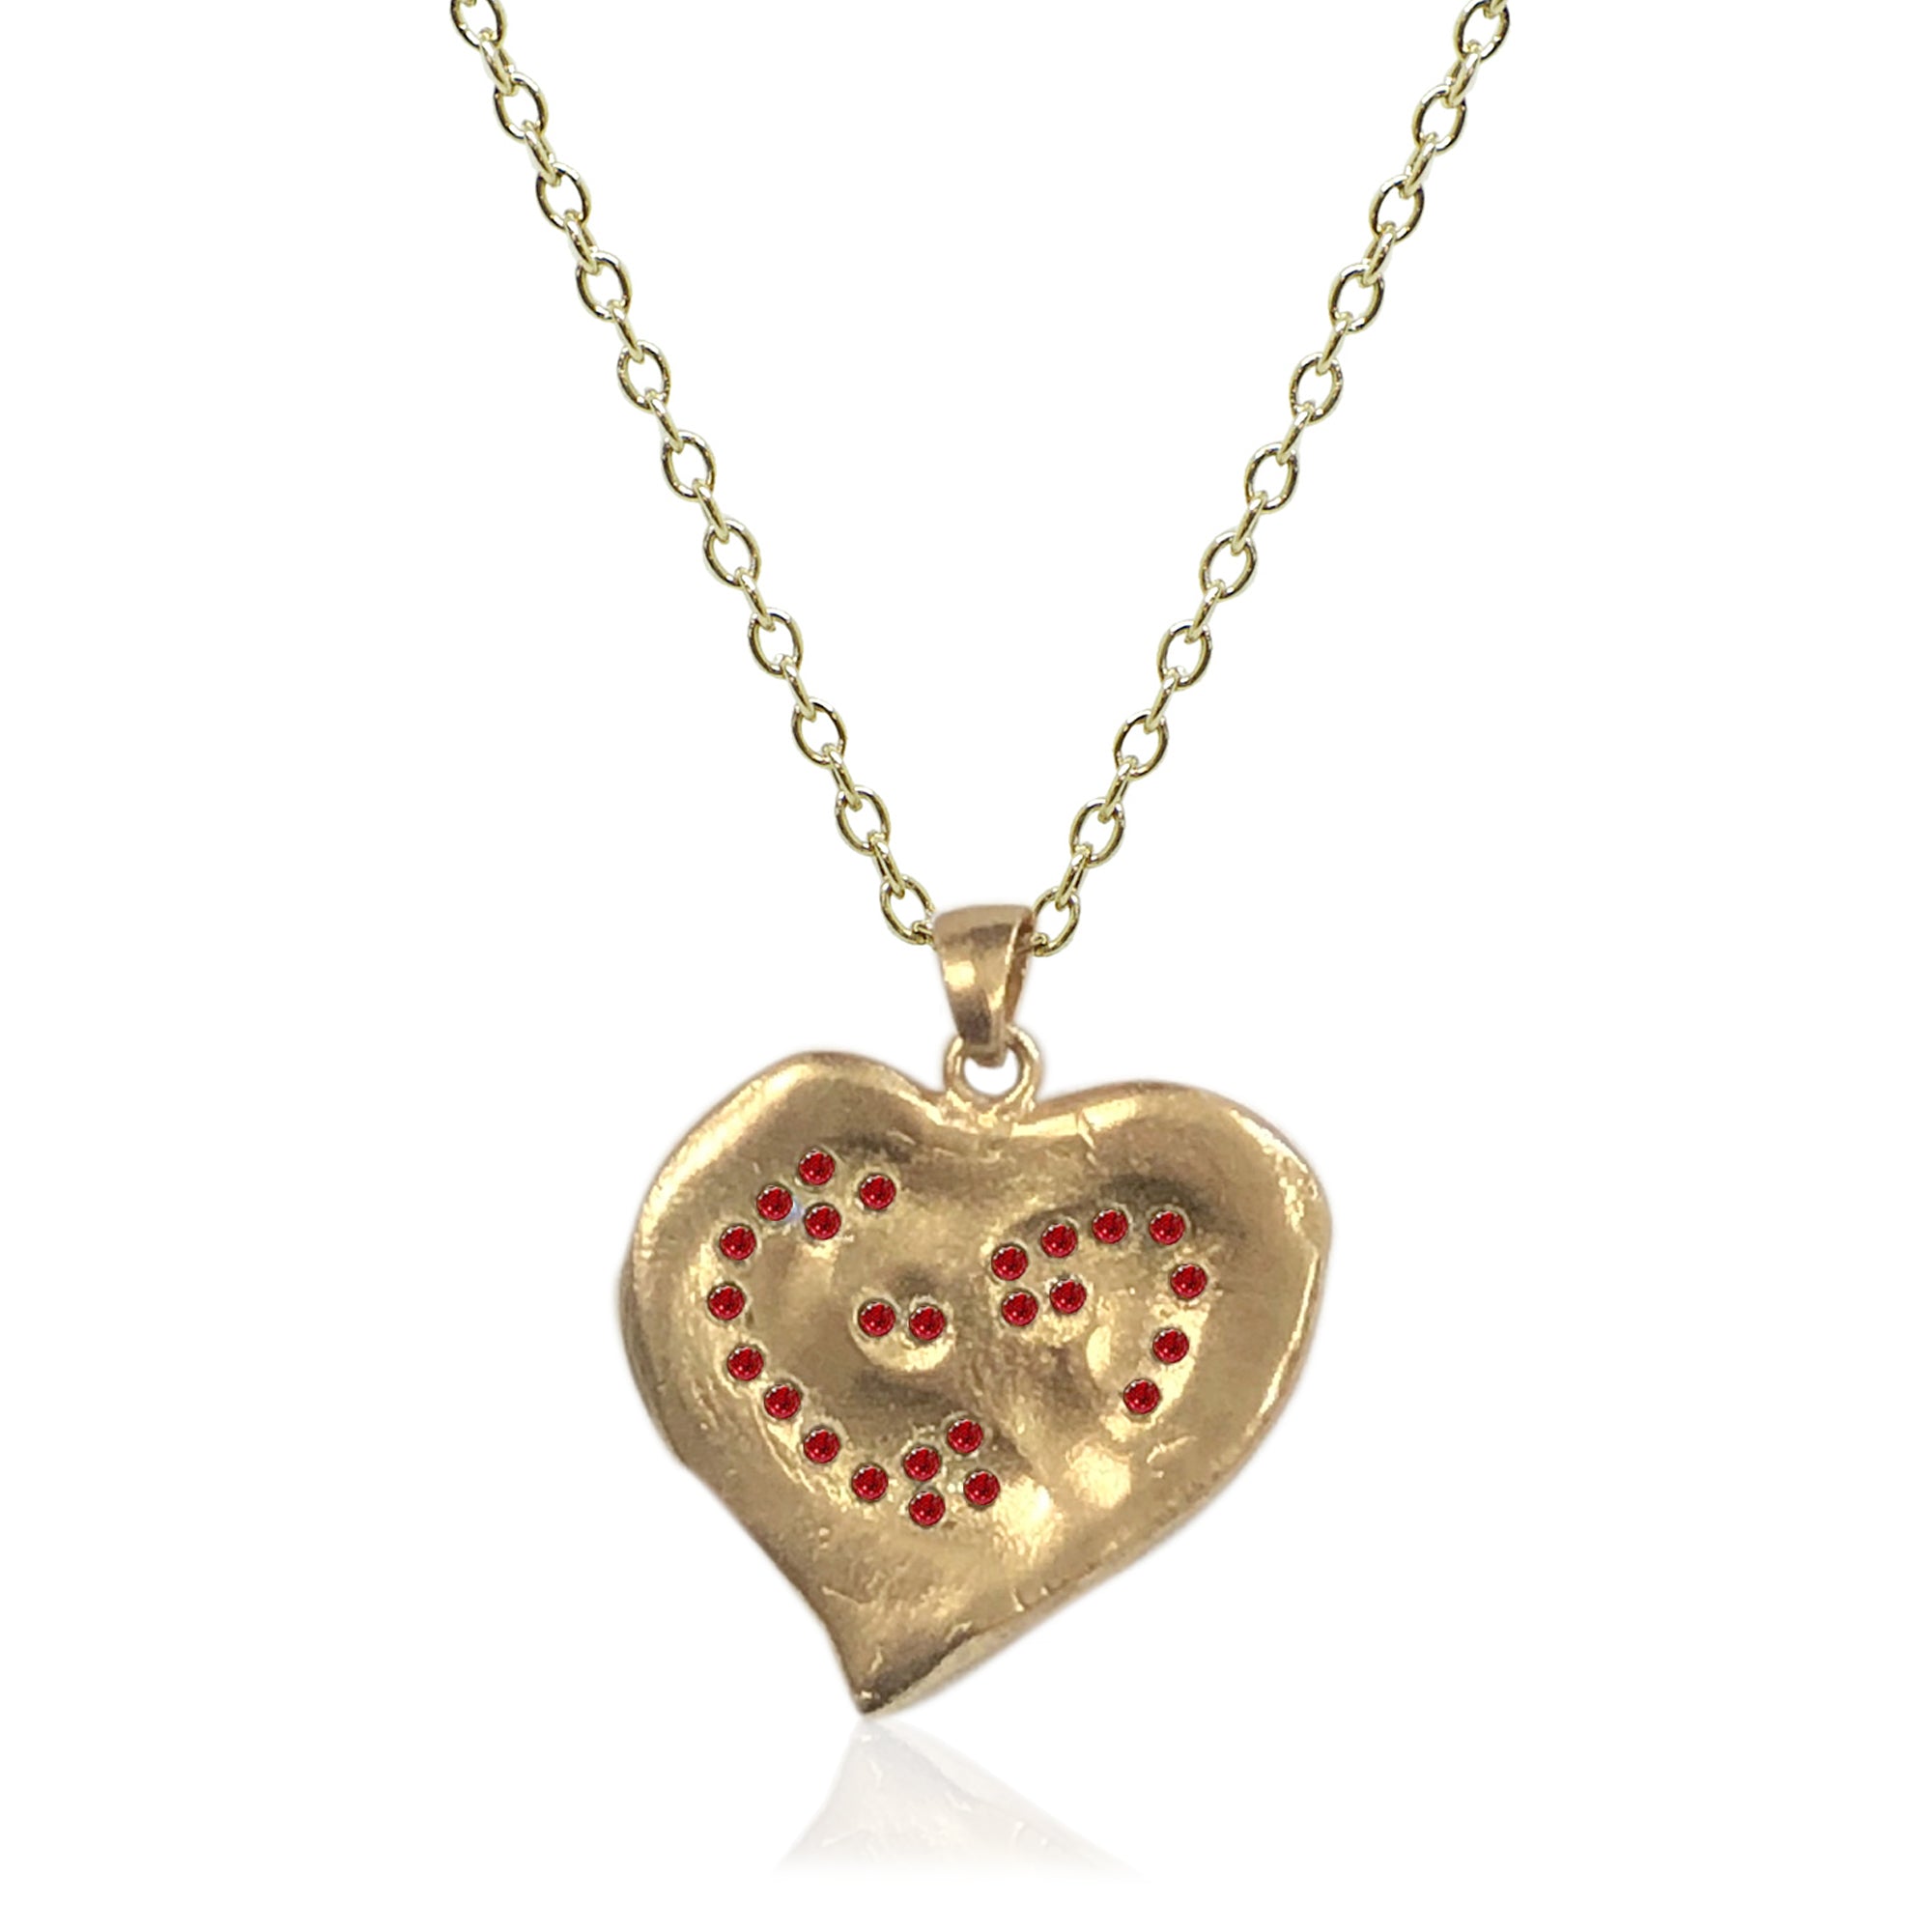 LARGE GOLD & RUBY CRYSTAL IMPRESSION HEART NECKLACE